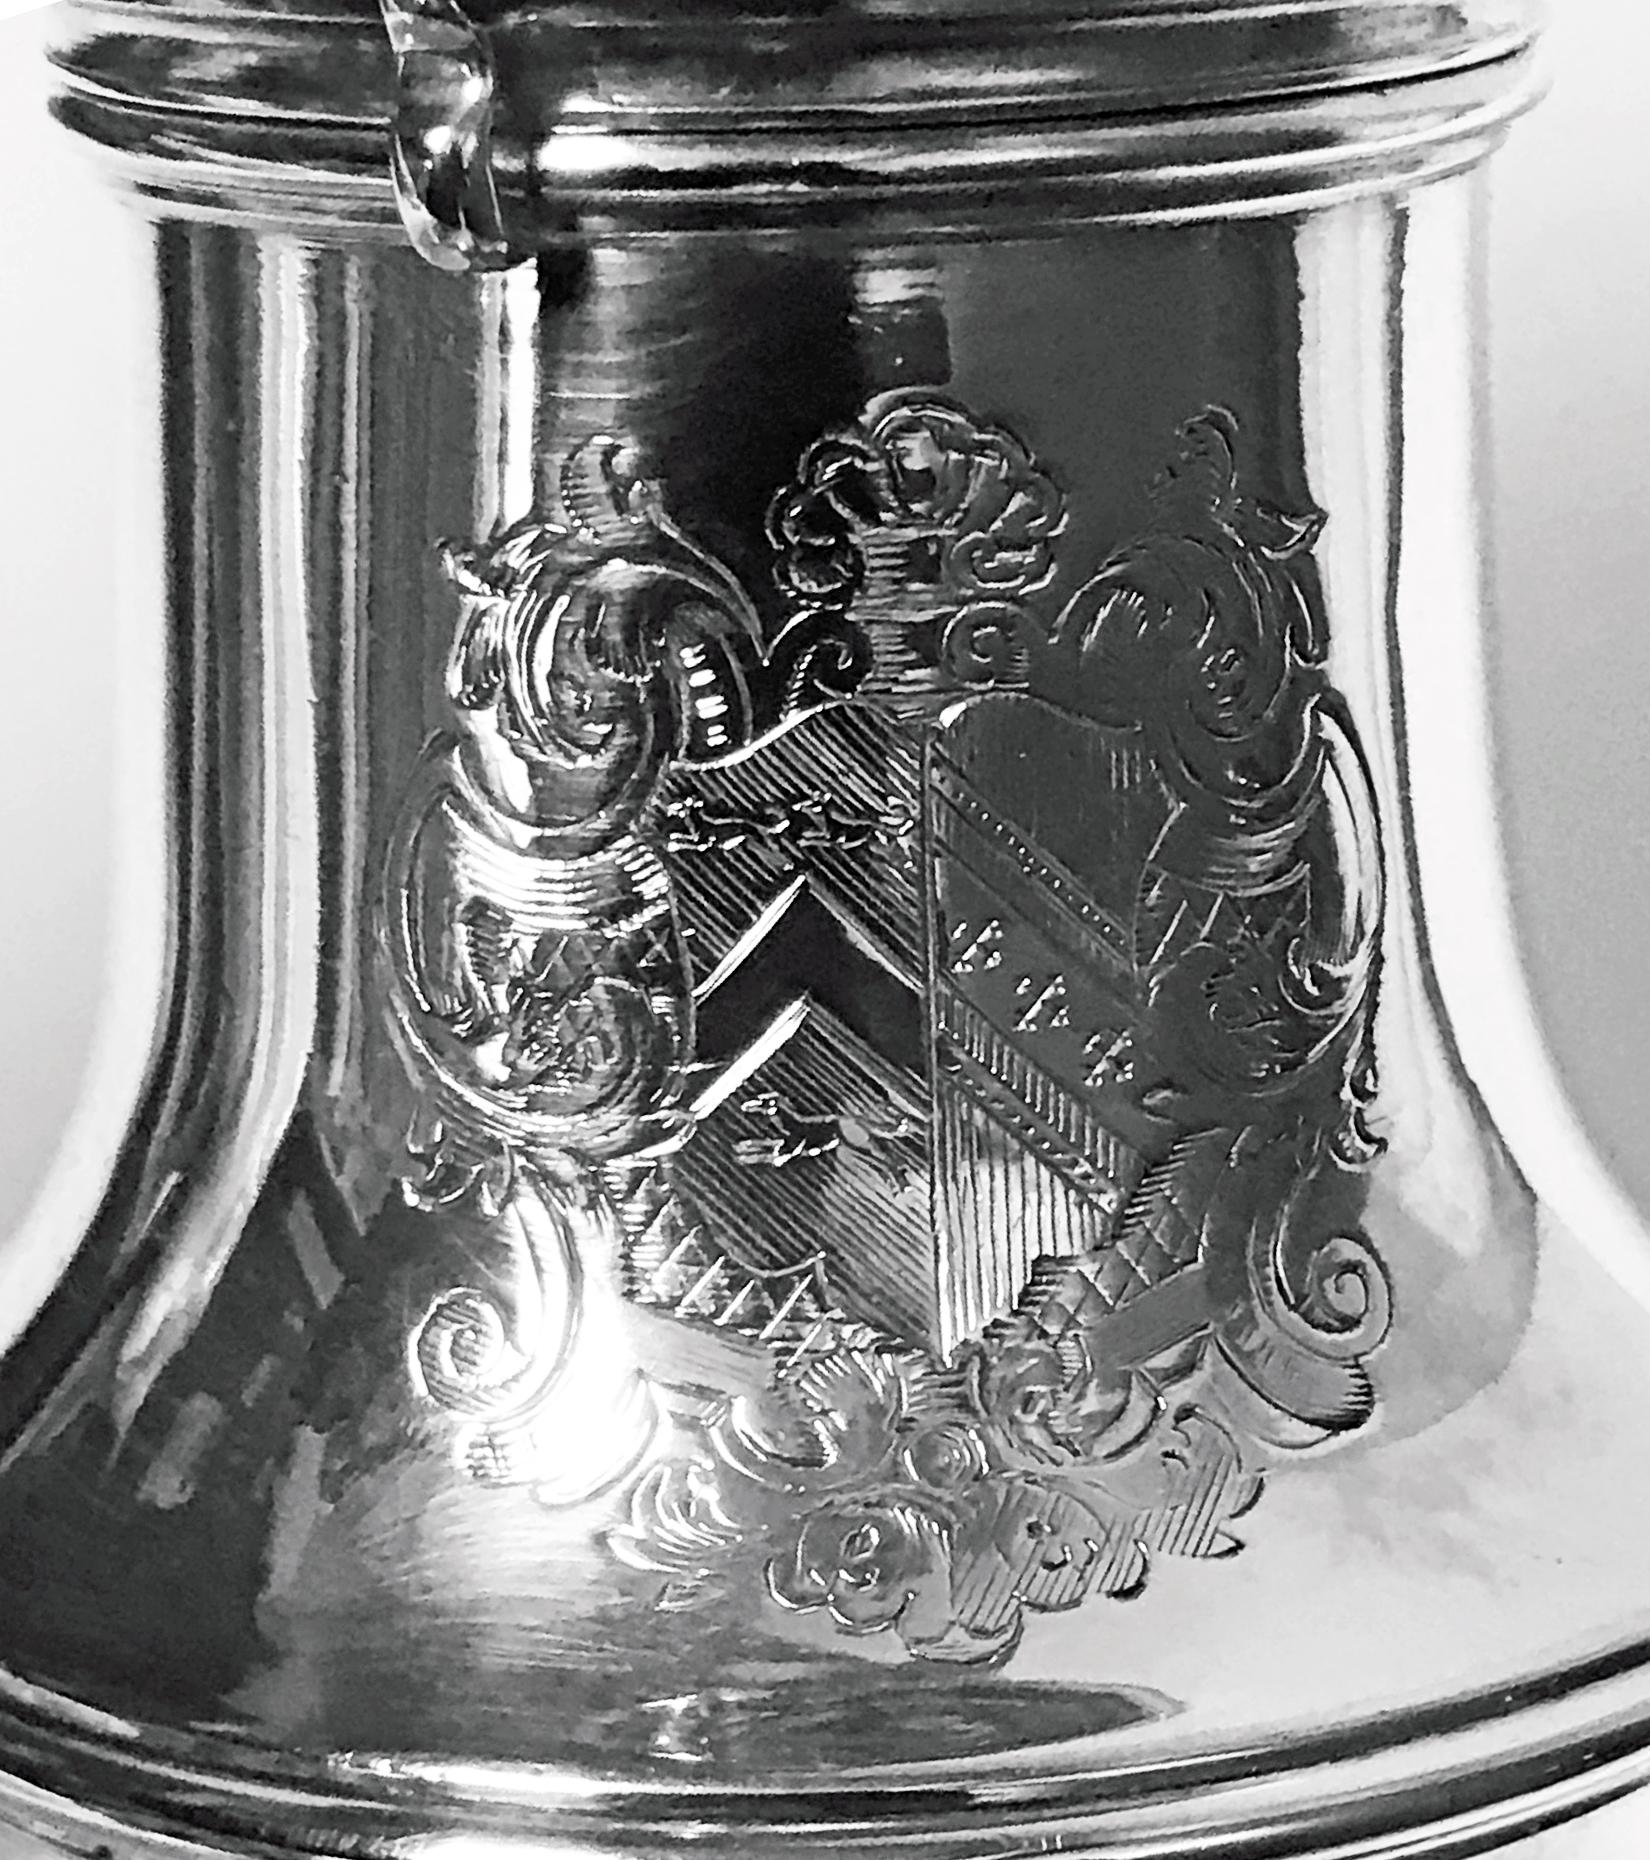 Large Georgian John Chartier Silver Muffineer Sugar Caster, London, 1729. Large heavy silver gauge baluster form on pedestal foot, detachable bayonet fitting panel pierced cover. Plain body engraved with armorial coat of arms. Fully hallmarked under